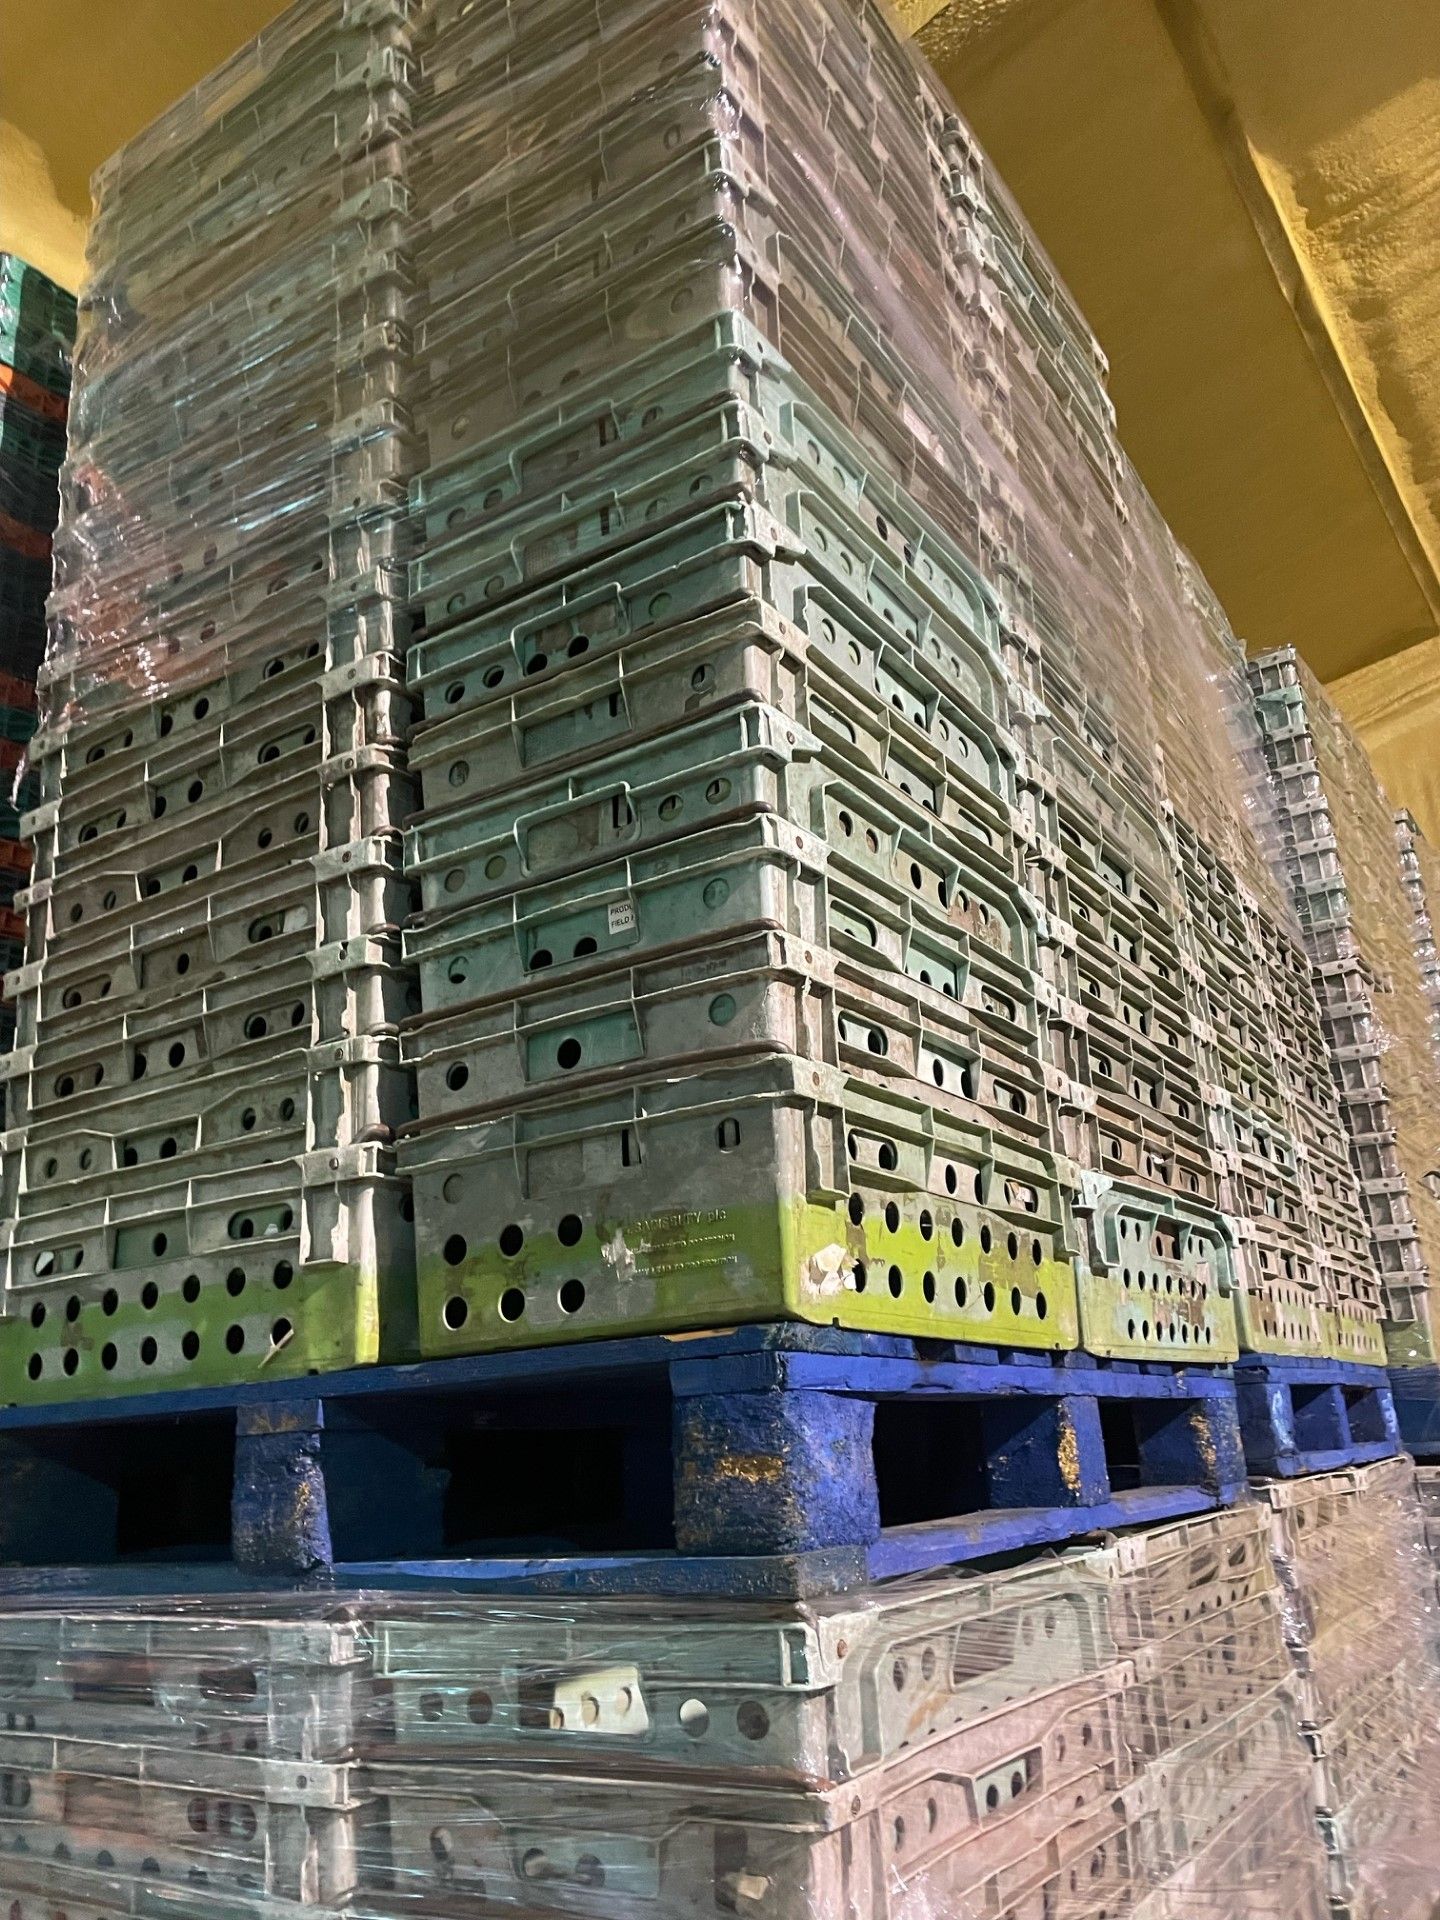 crates x 920 on 12 pallets